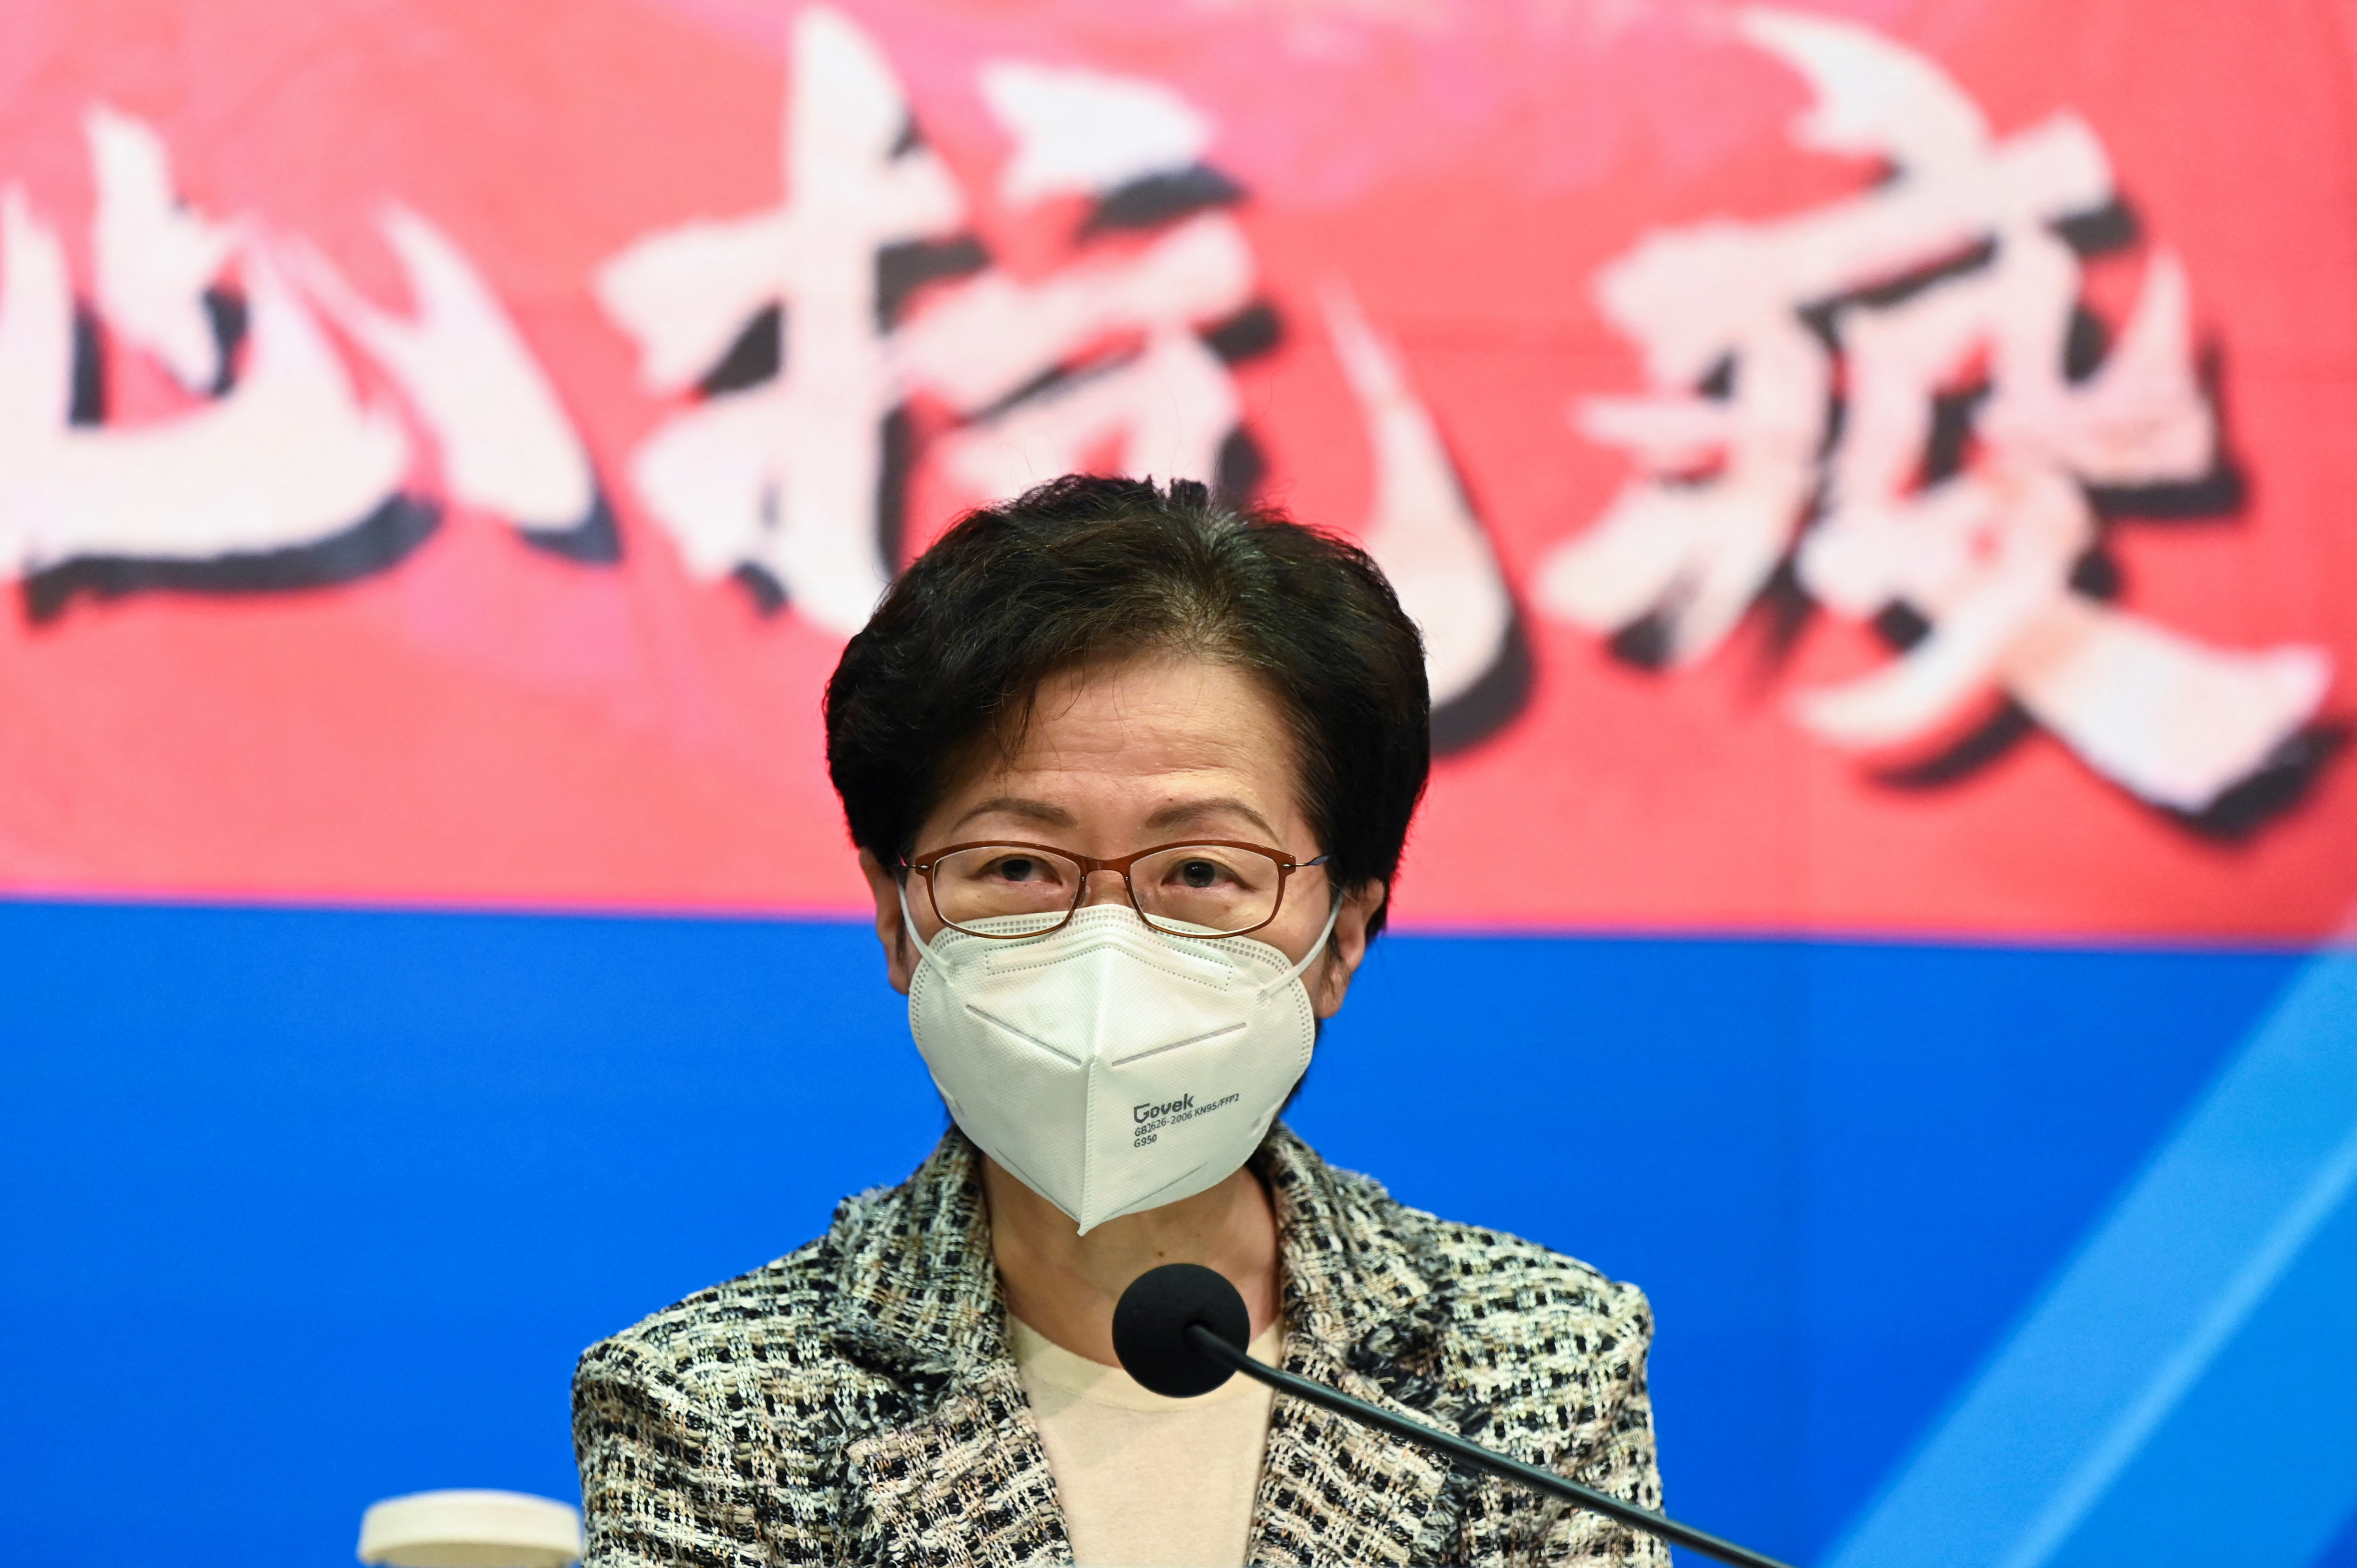 Hong Kong Chief Executive Carrie Lam speaks during a news conference, in Hong Kong